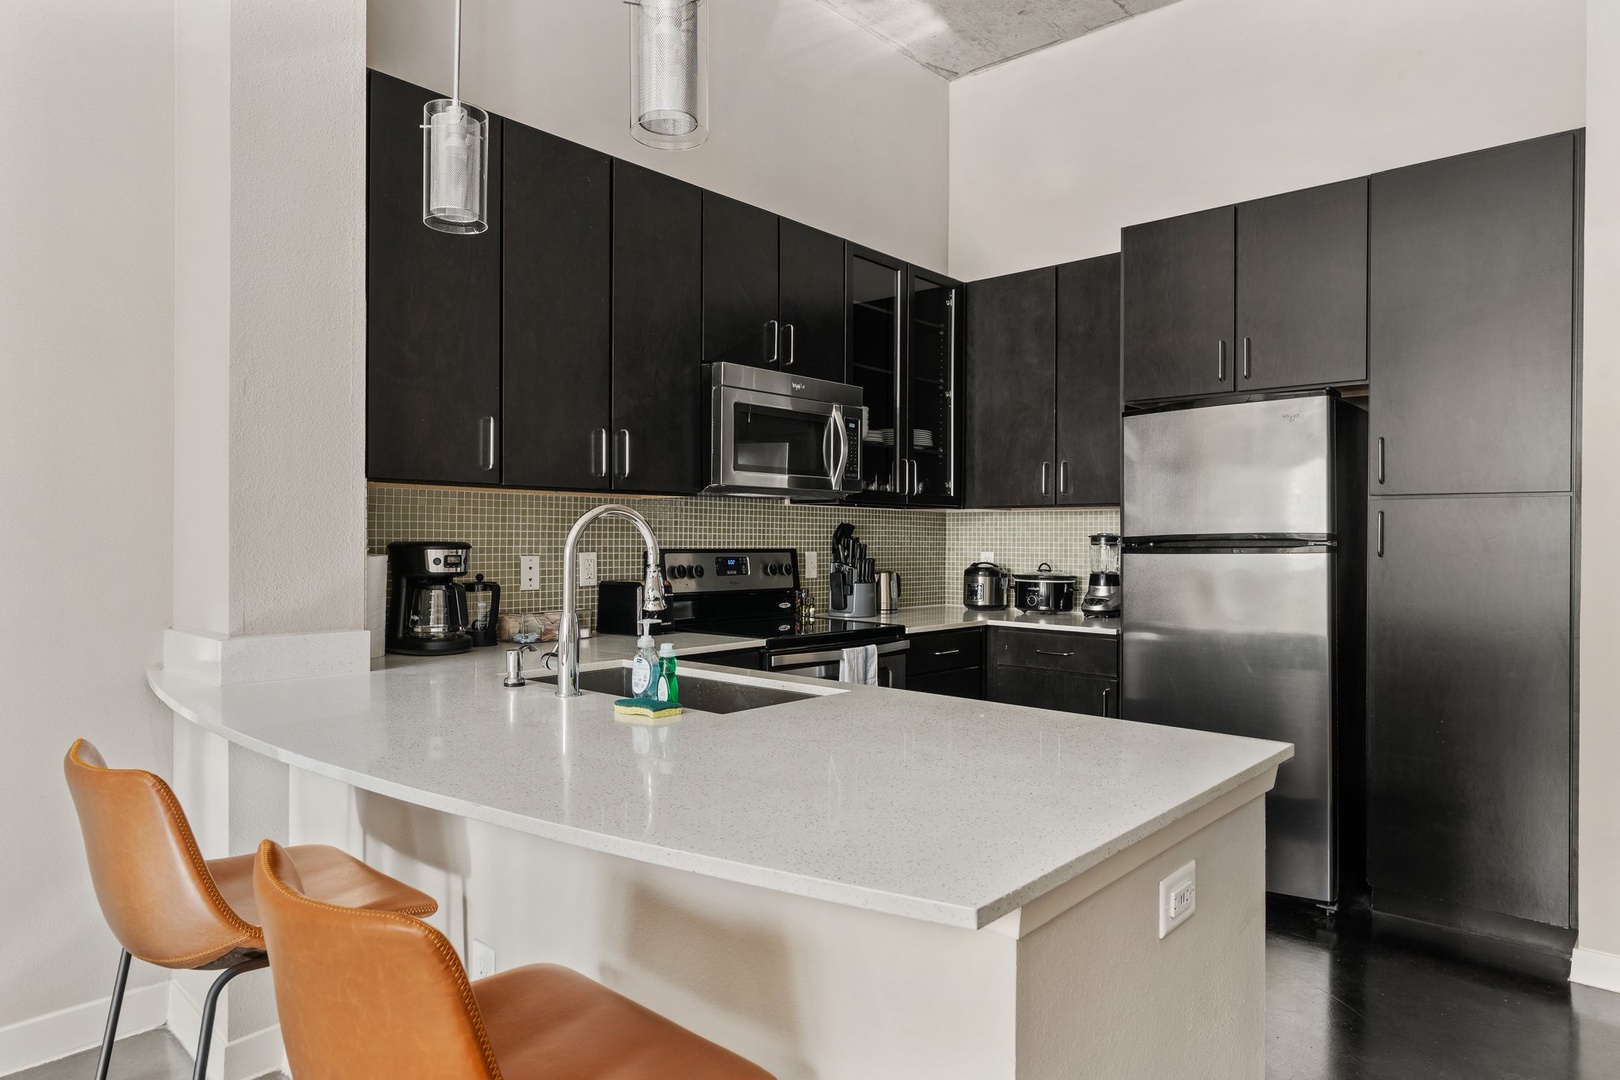 Make memorable meals in this well-appointed kitchen with modern amenities.